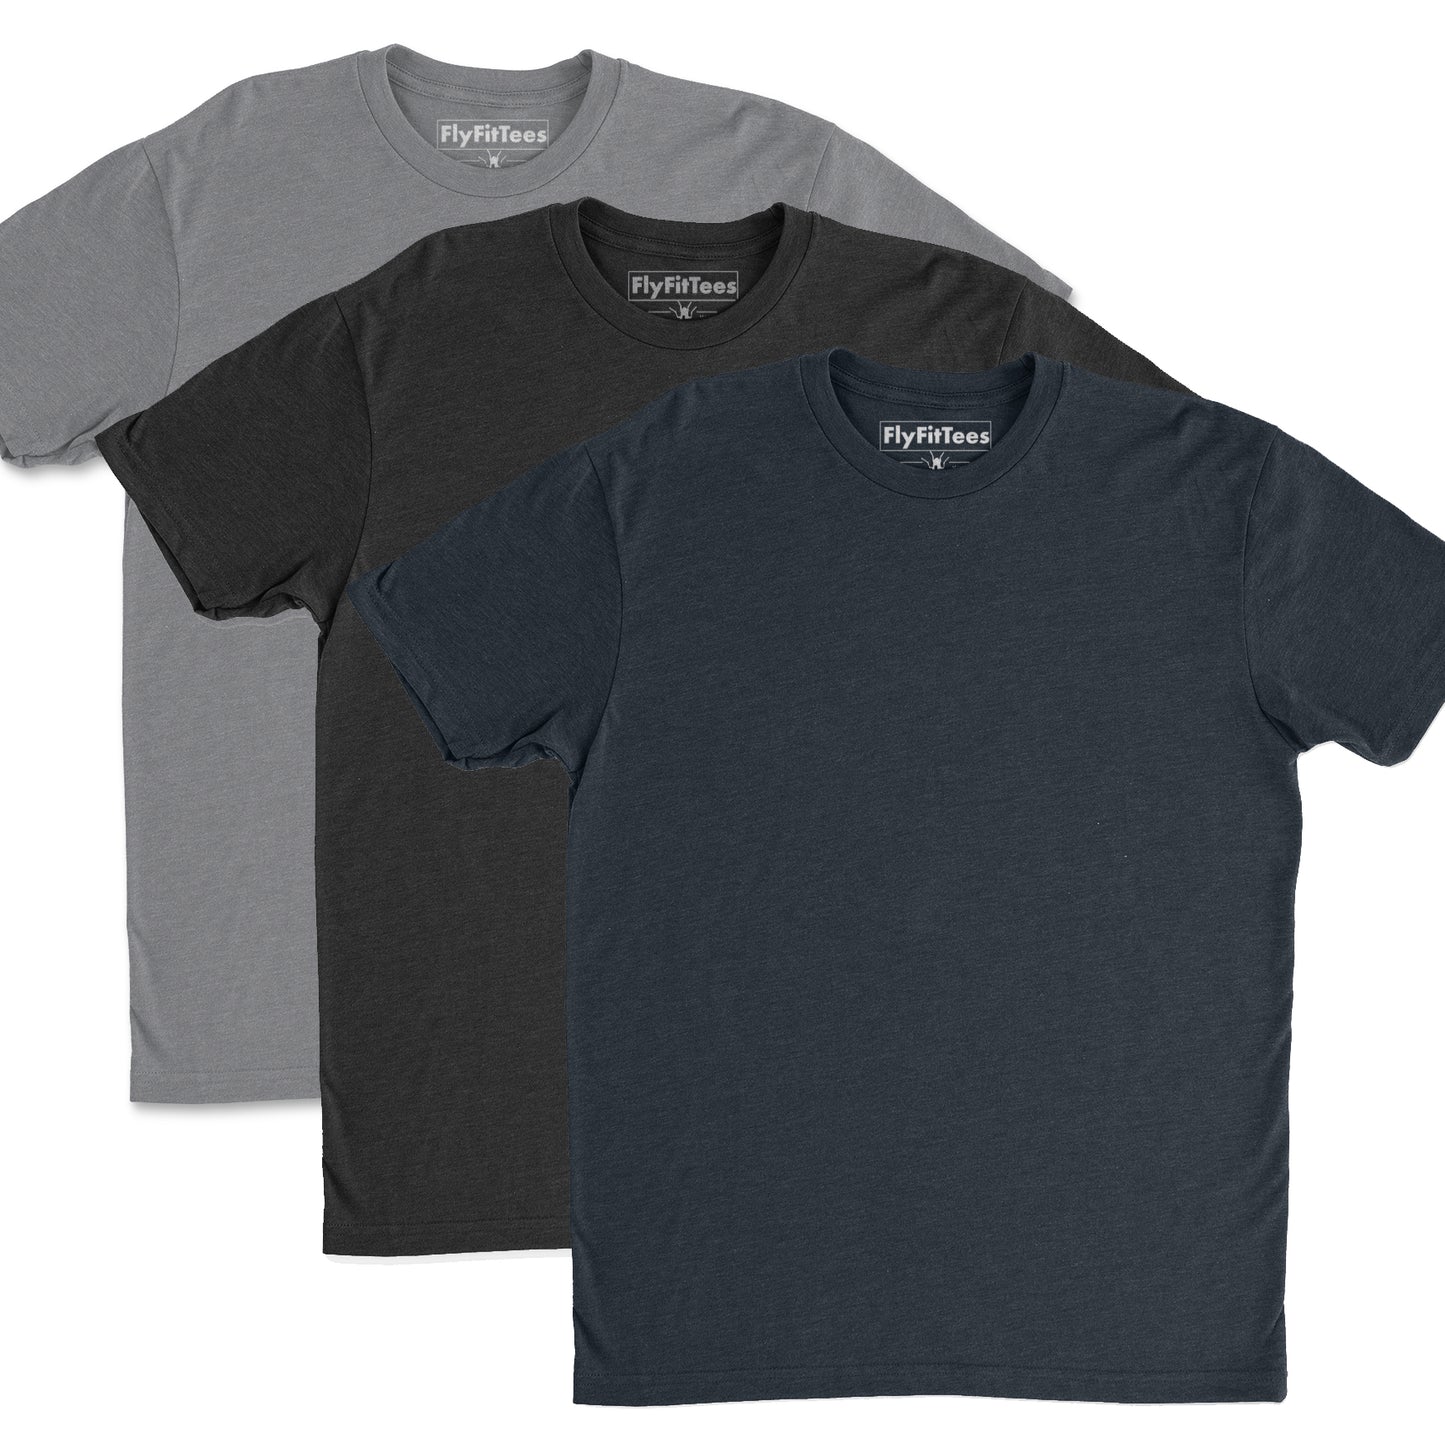 SoFly Perfect Fit Tee - 3 Pack - Black Gray Navy Dad Bod DadBod Shirt ...